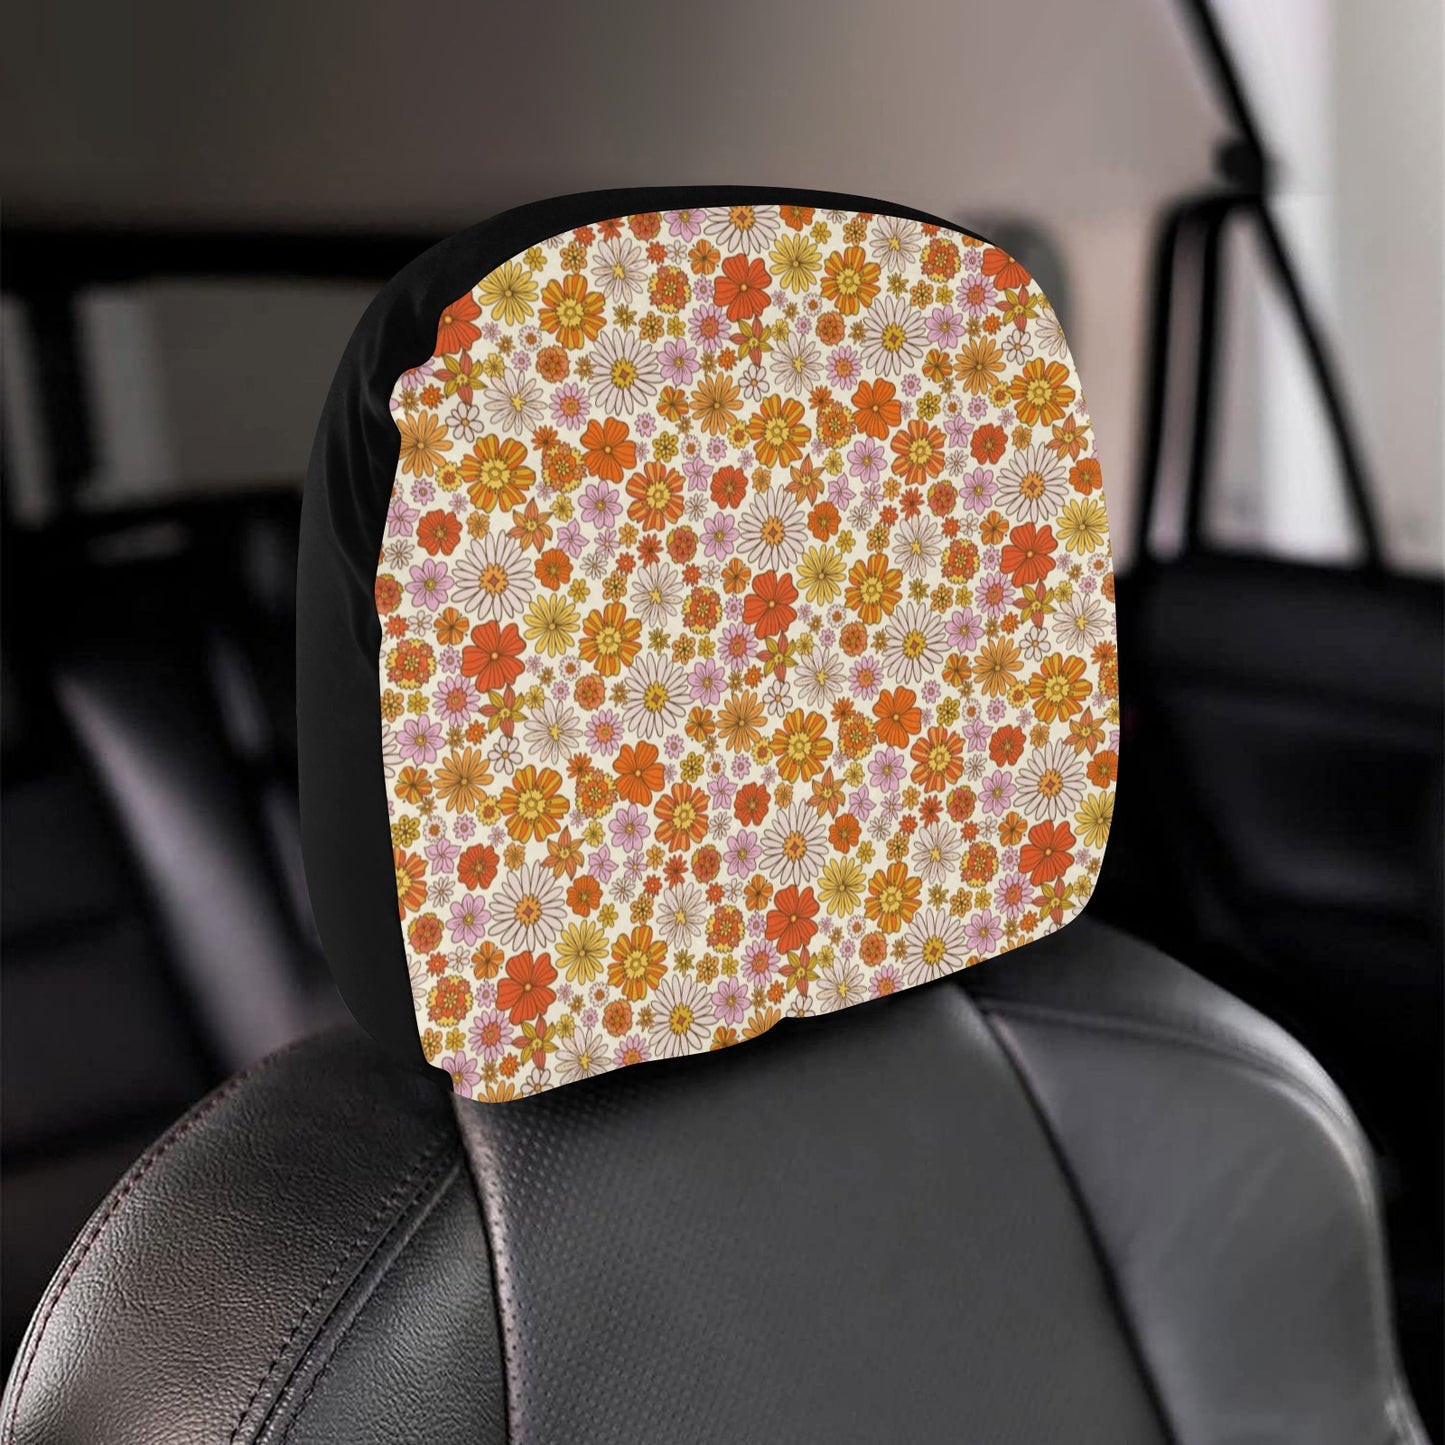 Groovy Flowers Car Seat Headrest Cover (2pcs), Vintage Floral 70s Truck Suv Van Vehicle Auto Decoration Protector New Car Gift Starcove Fashion